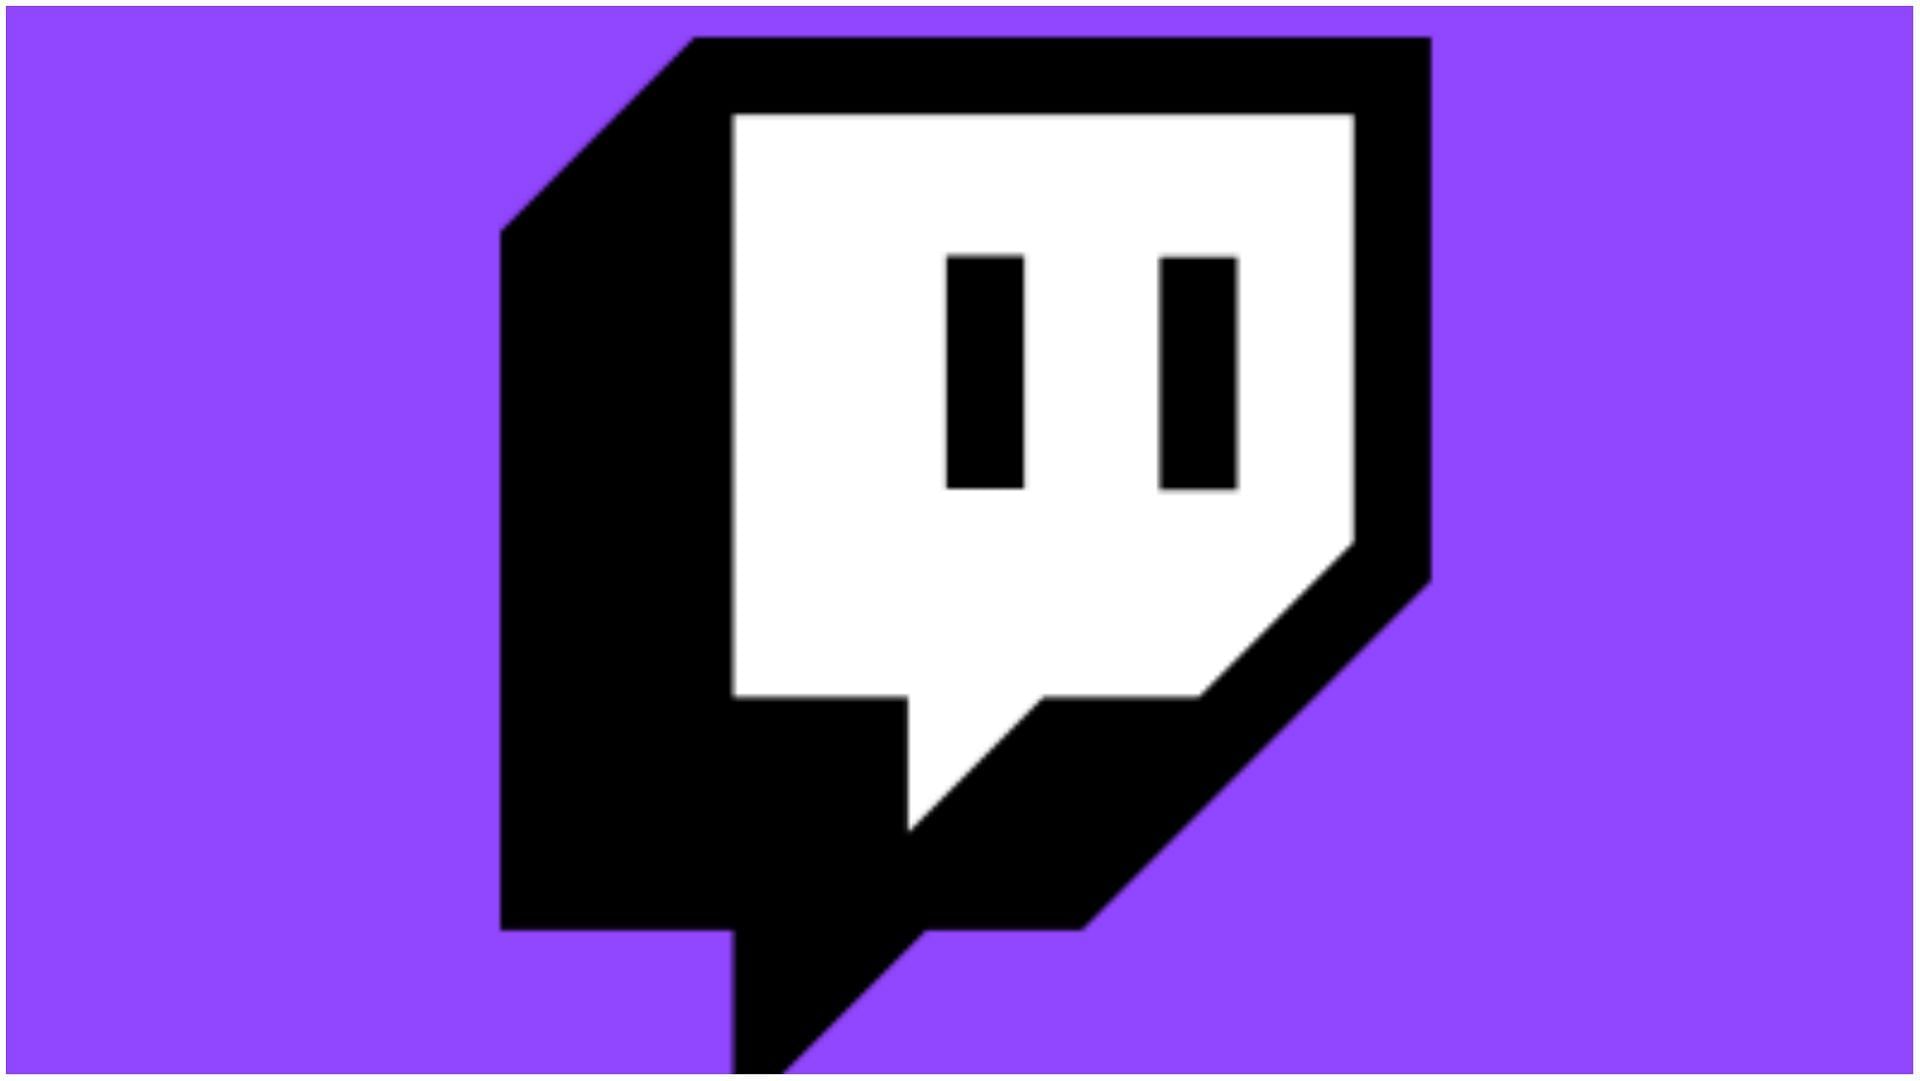 Twitch testing peer-to-peer technology for source quality streams in Korea despite potential privacy concerns